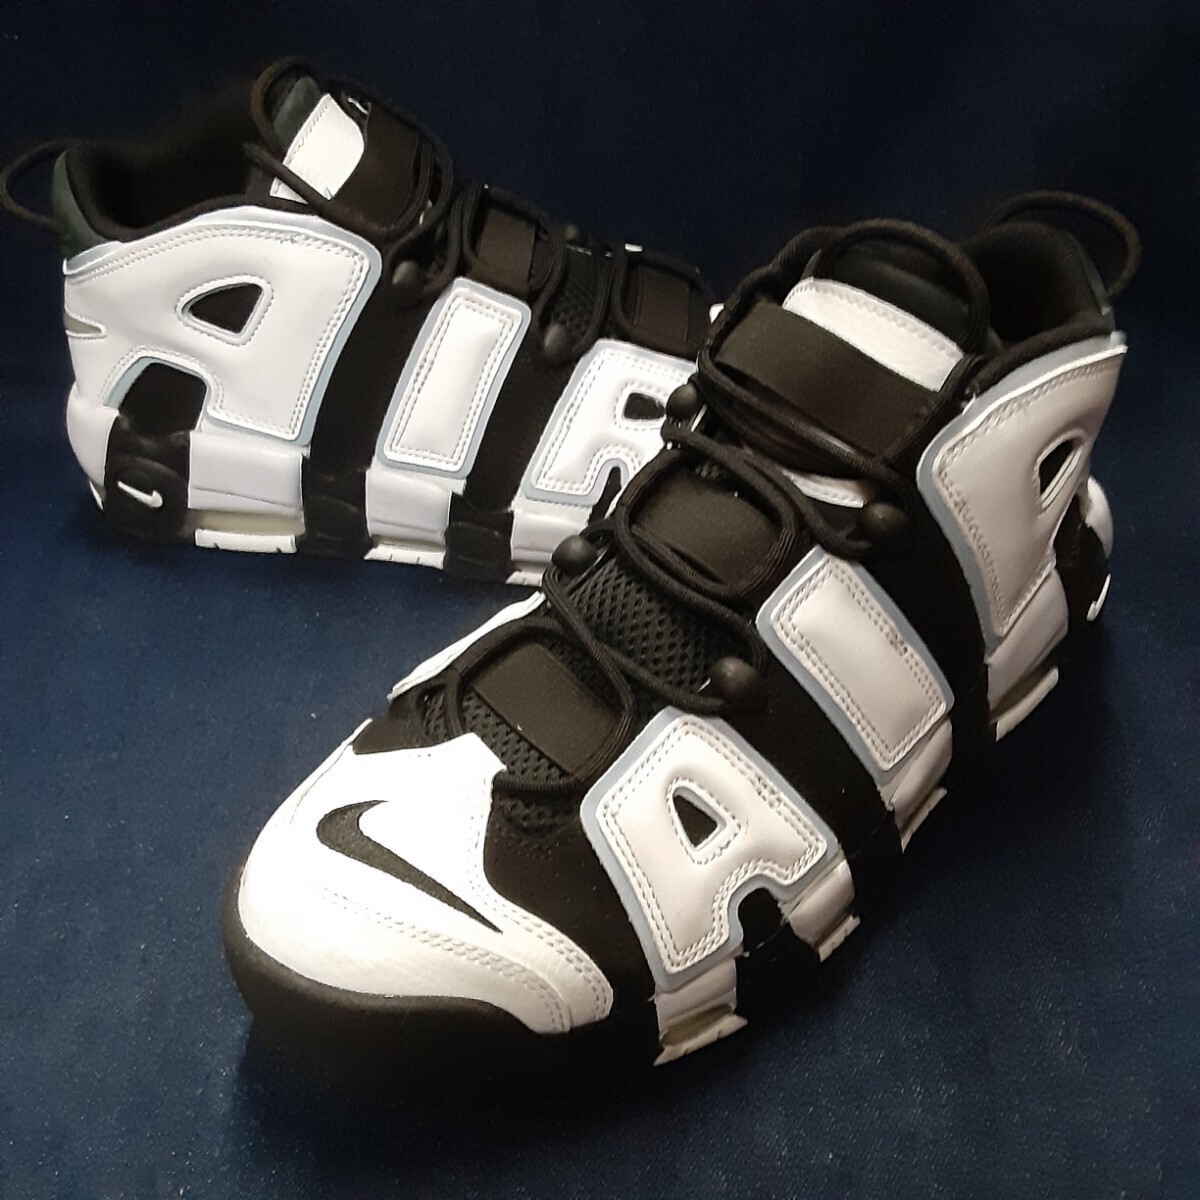  most price!.19800 jpy!96 year complete reissue! Nike air moa up ton po96 high class thickness bottom sneakers! white × black! white black rare big size 29cm box attaching 